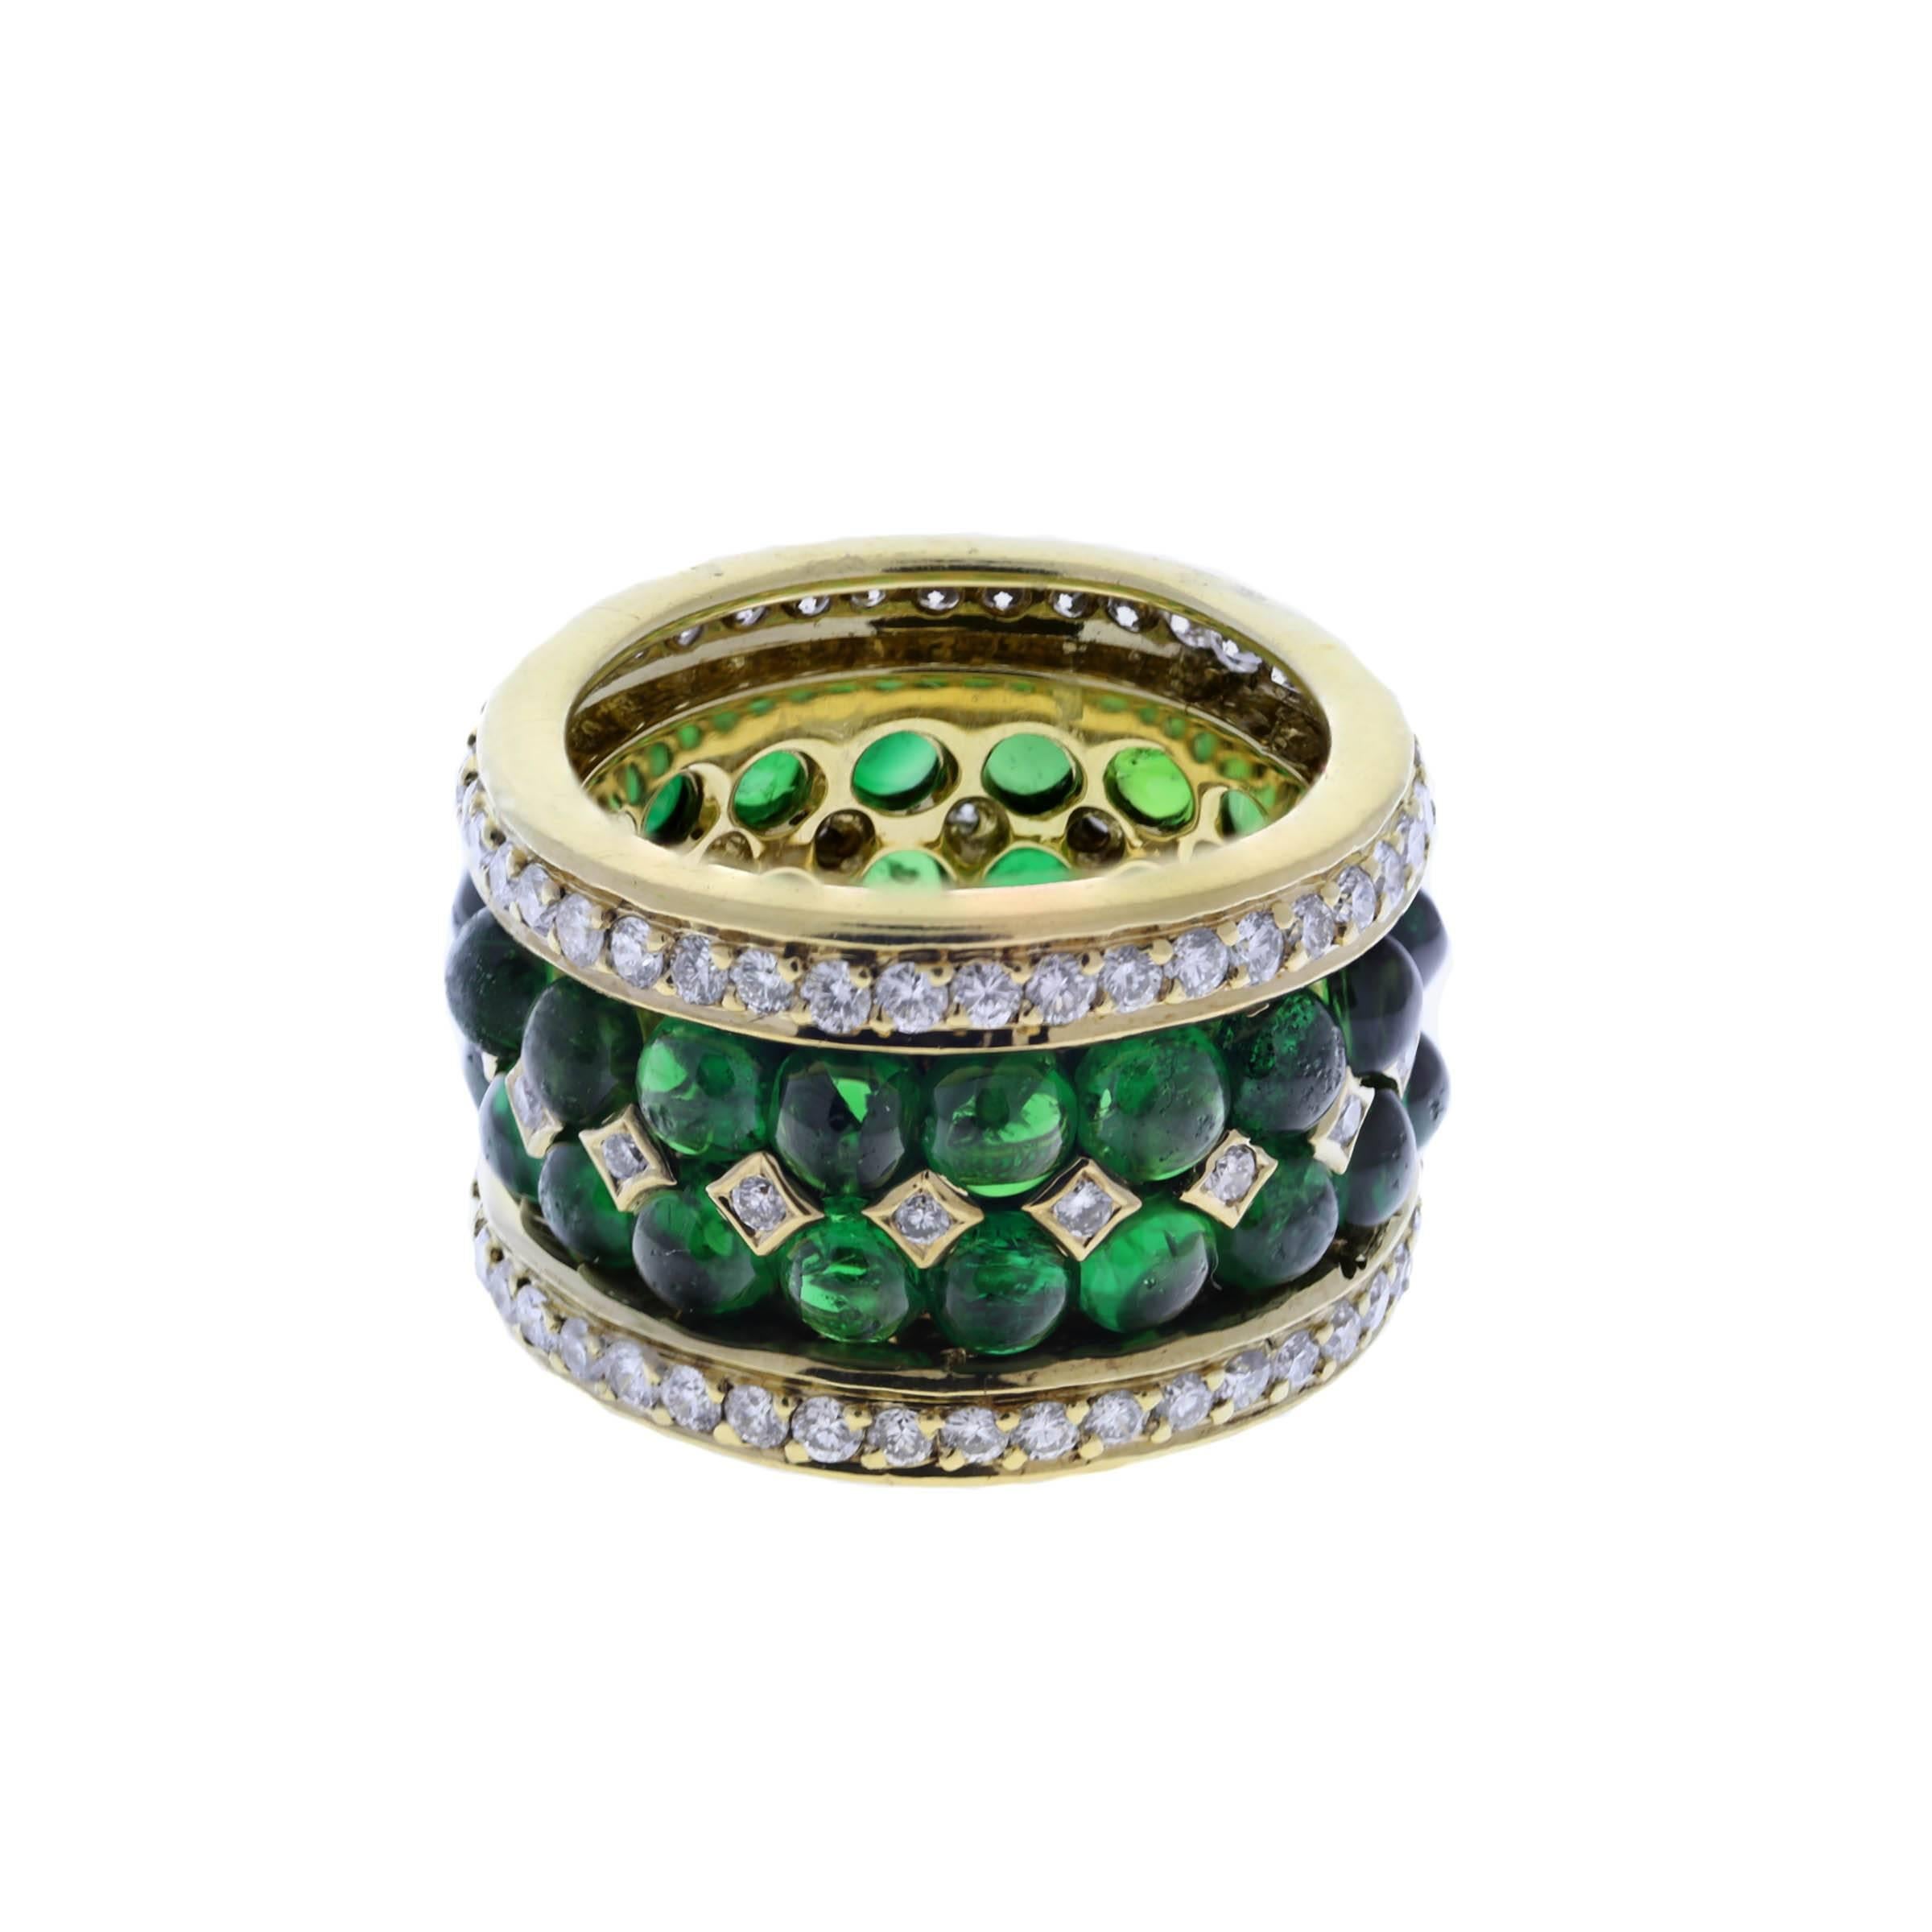 18K one-of-a-kind green tourmaline cabochon and diamond band ring. The tourmalines weigh combined 15.8 carats and the diamonds weigh combined 1.68 carat.
Size 6 1/2. Ring can not be sized.